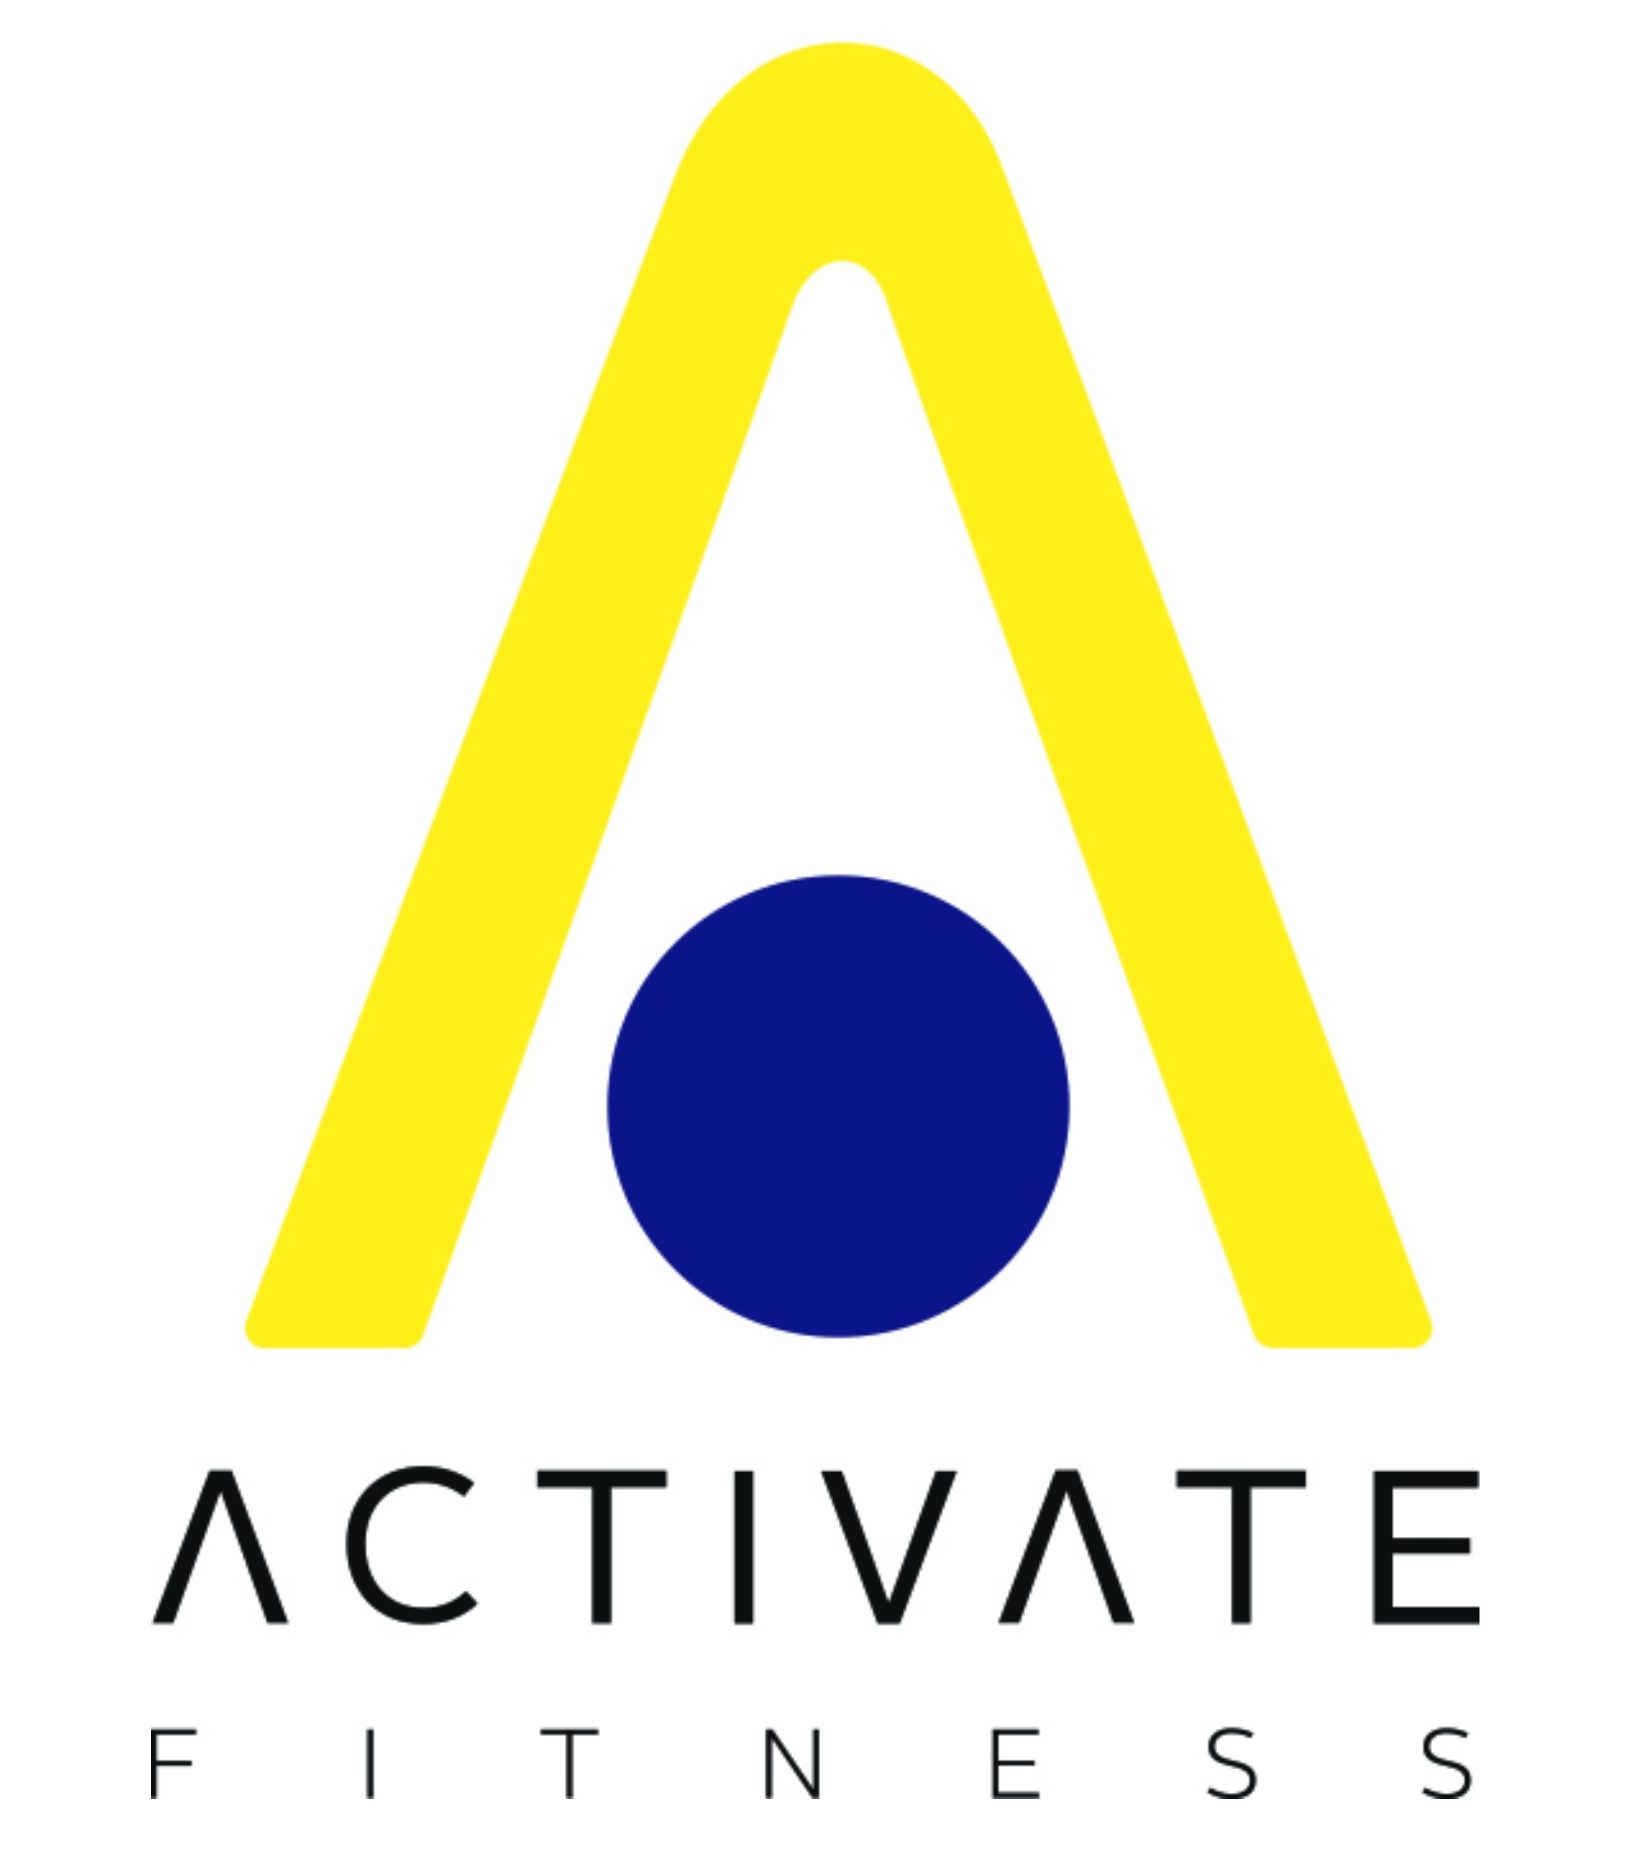 Activate Fitness